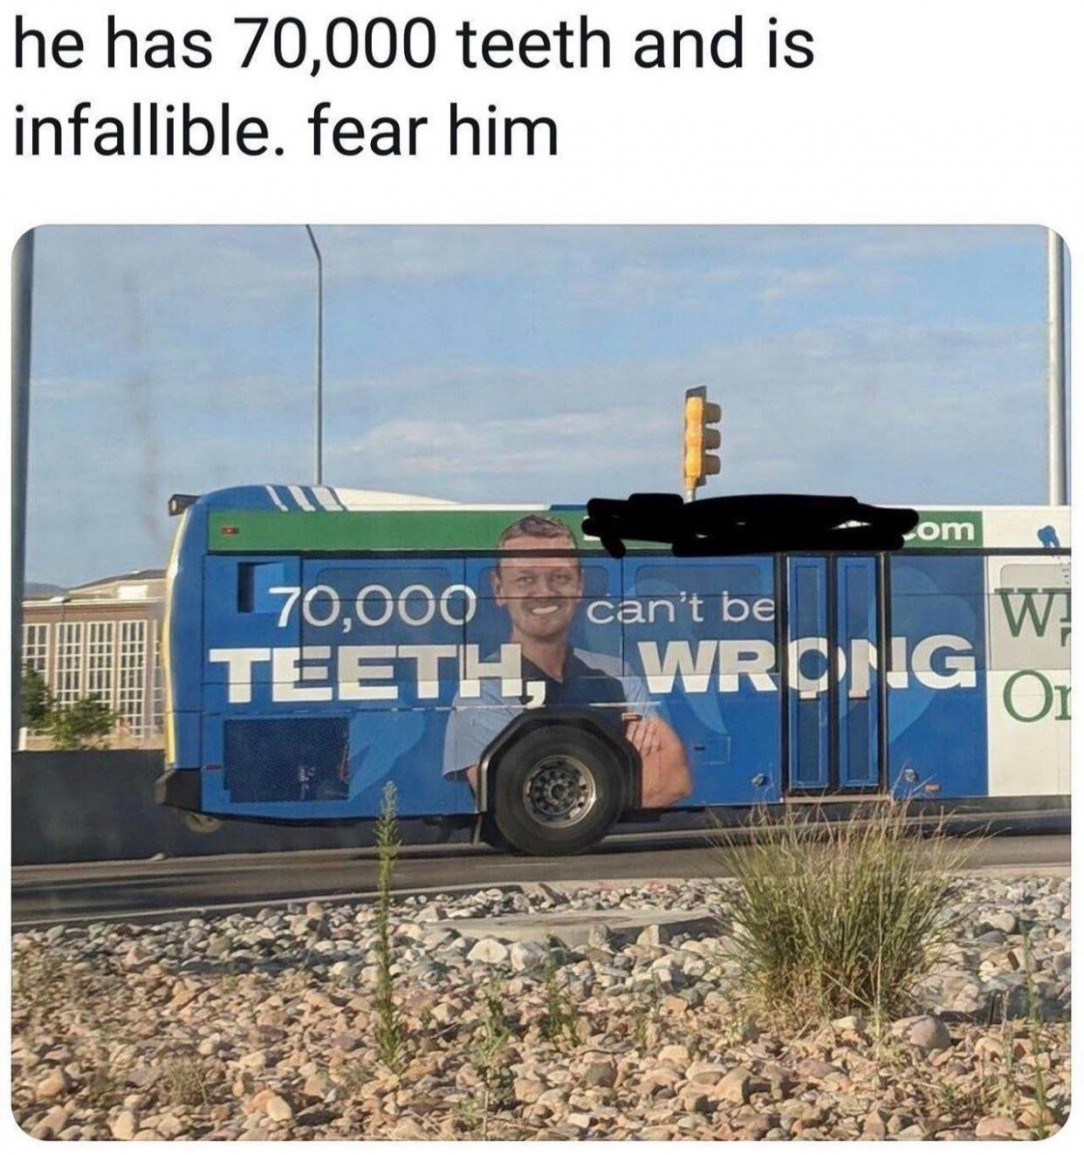 The God-eater Dentist, keeper of the Truth